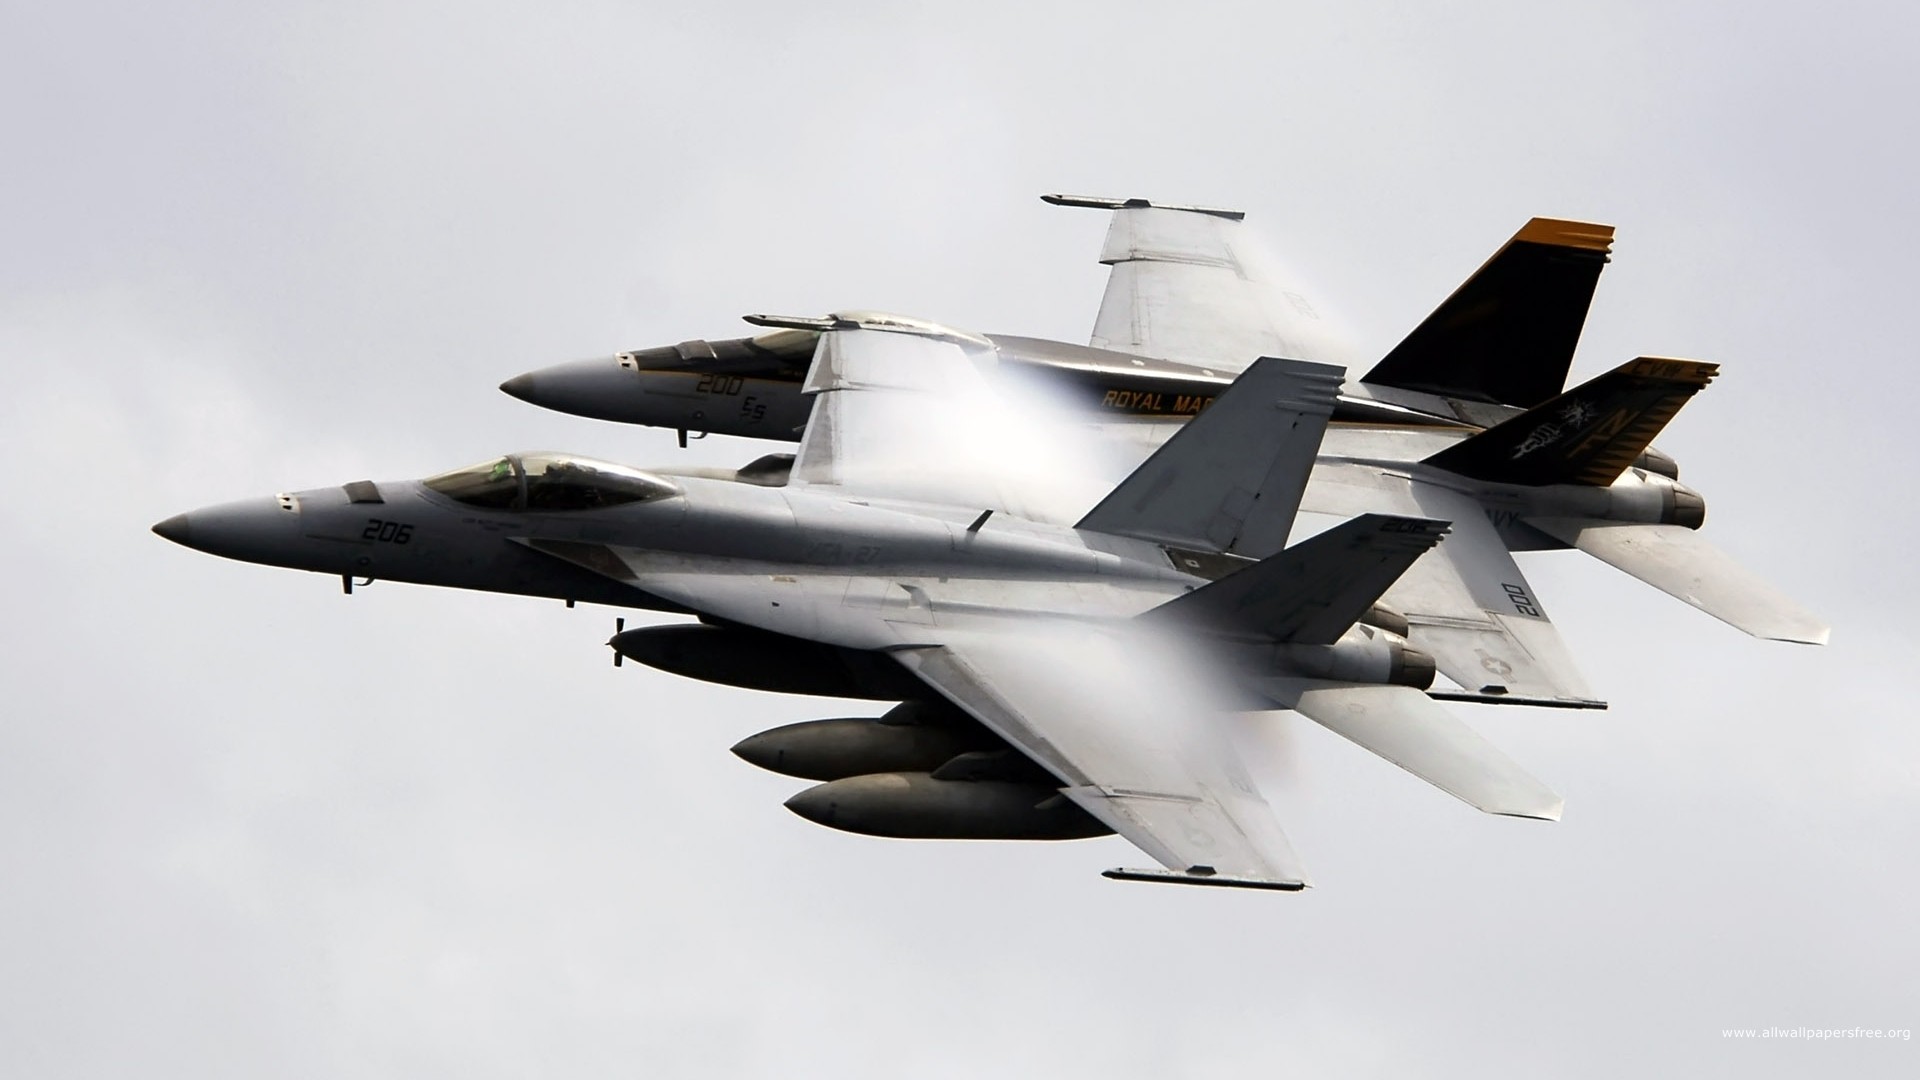 General 1920x1080 military aircraft airplane sky jets military aircraft McDonnell Douglas F/A-18 Hornet military vehicle vehicle American aircraft